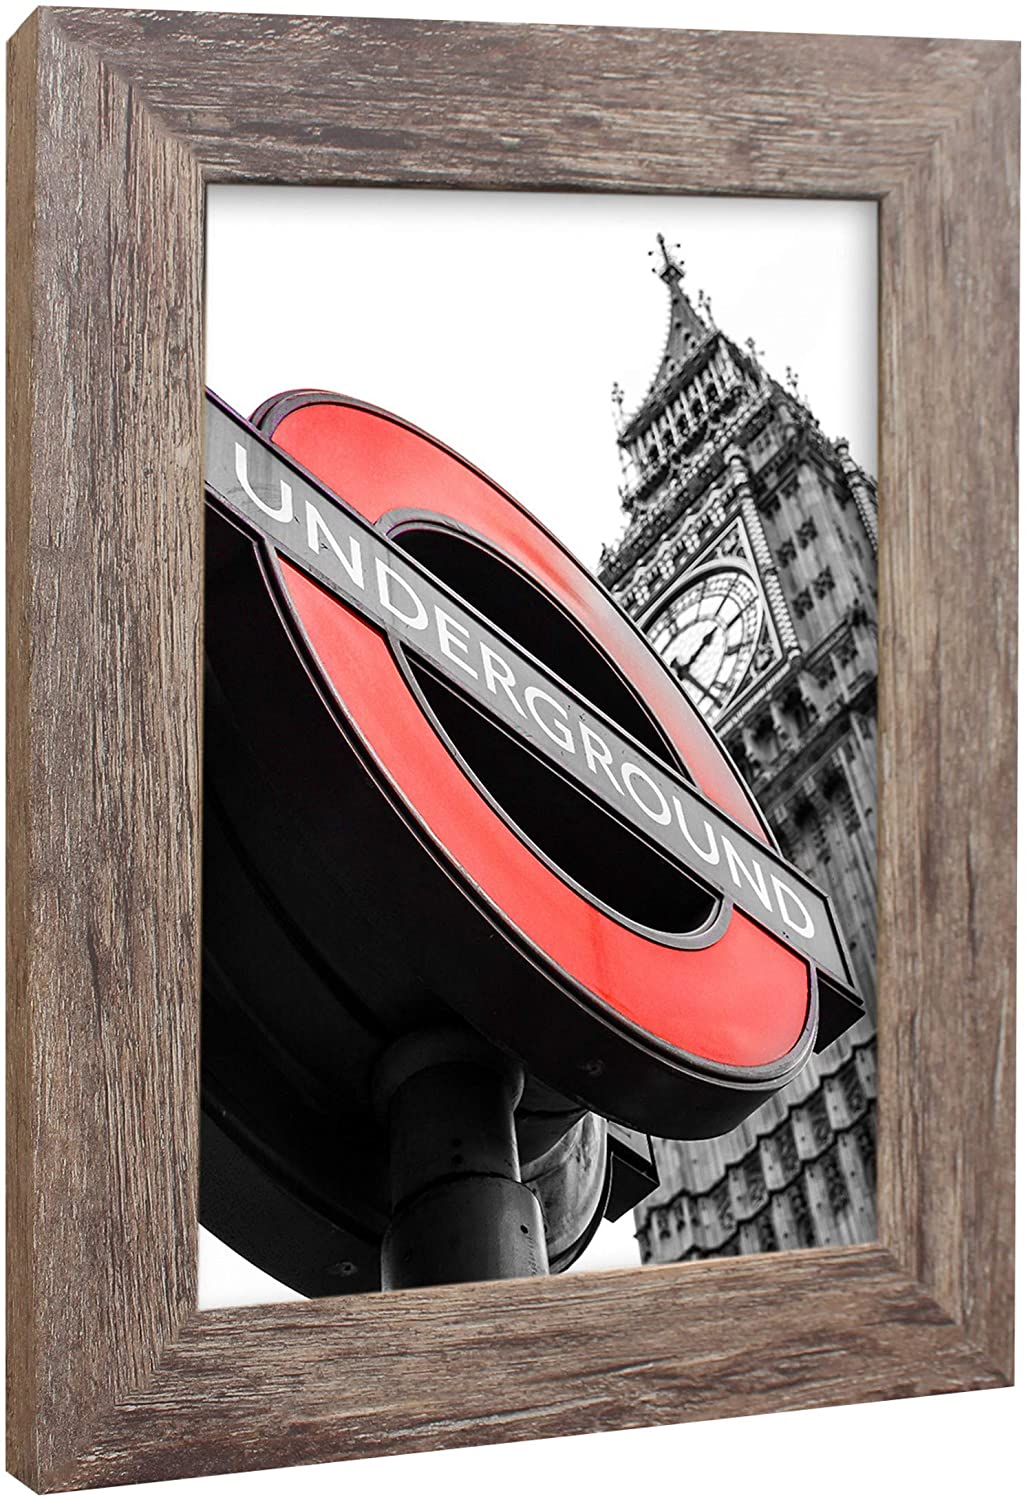 London Picture Frame Photo Frame 10 x 15 cm White Picture Frame for Hanging